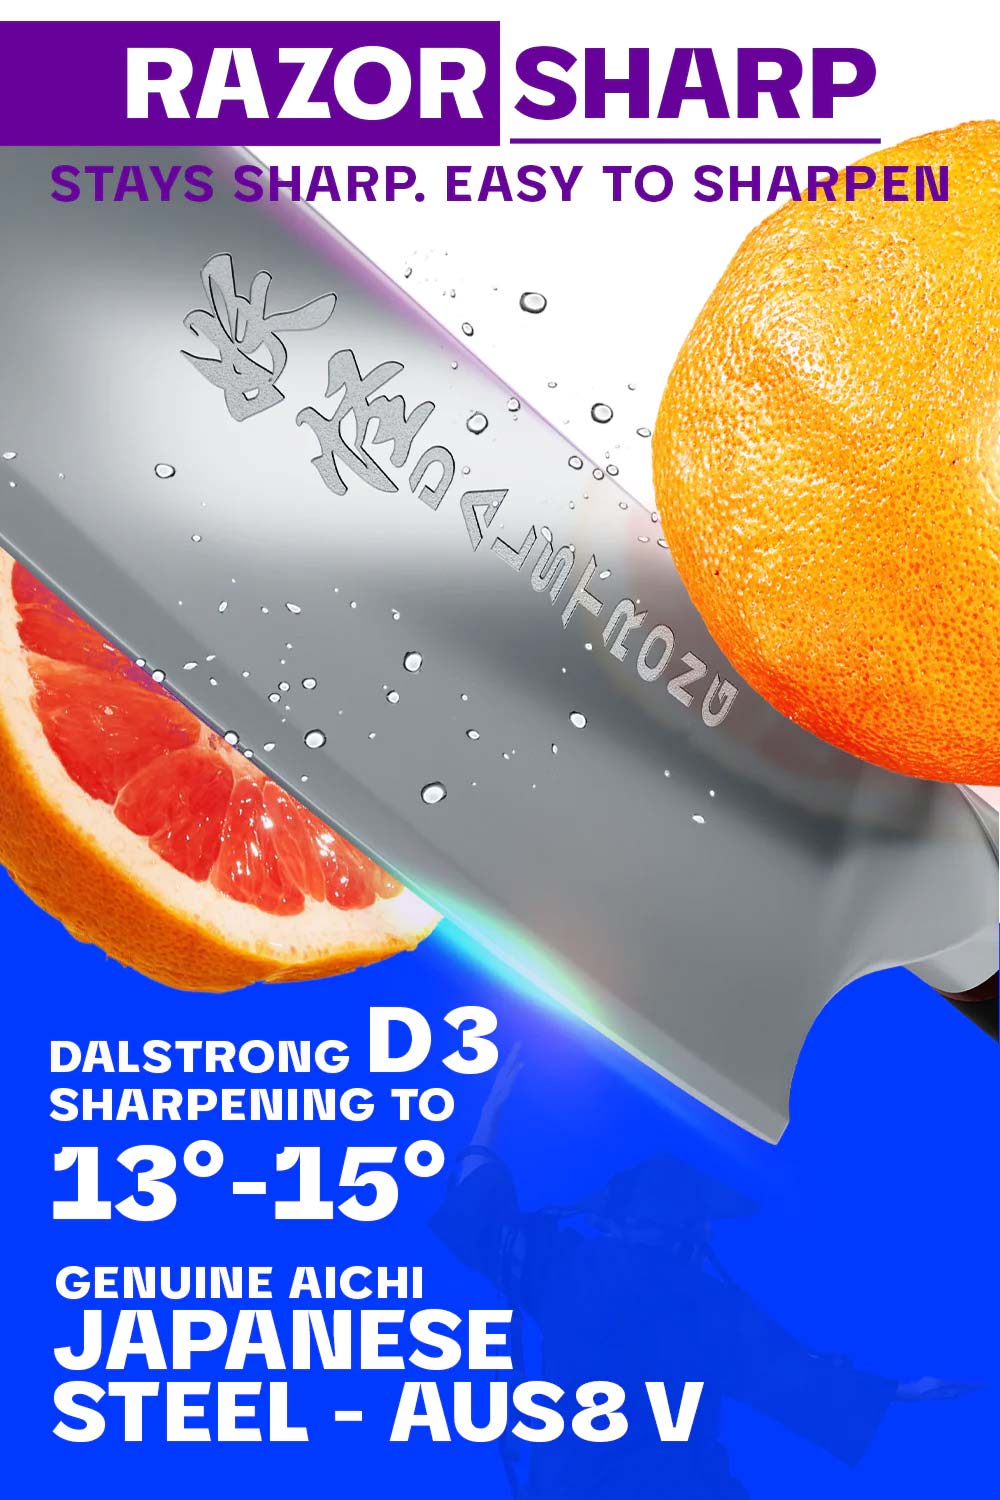 Dalstrong phantom series 8 inch chef knife with pakka wood handle featuring it's razor sharp japanese steel blade.